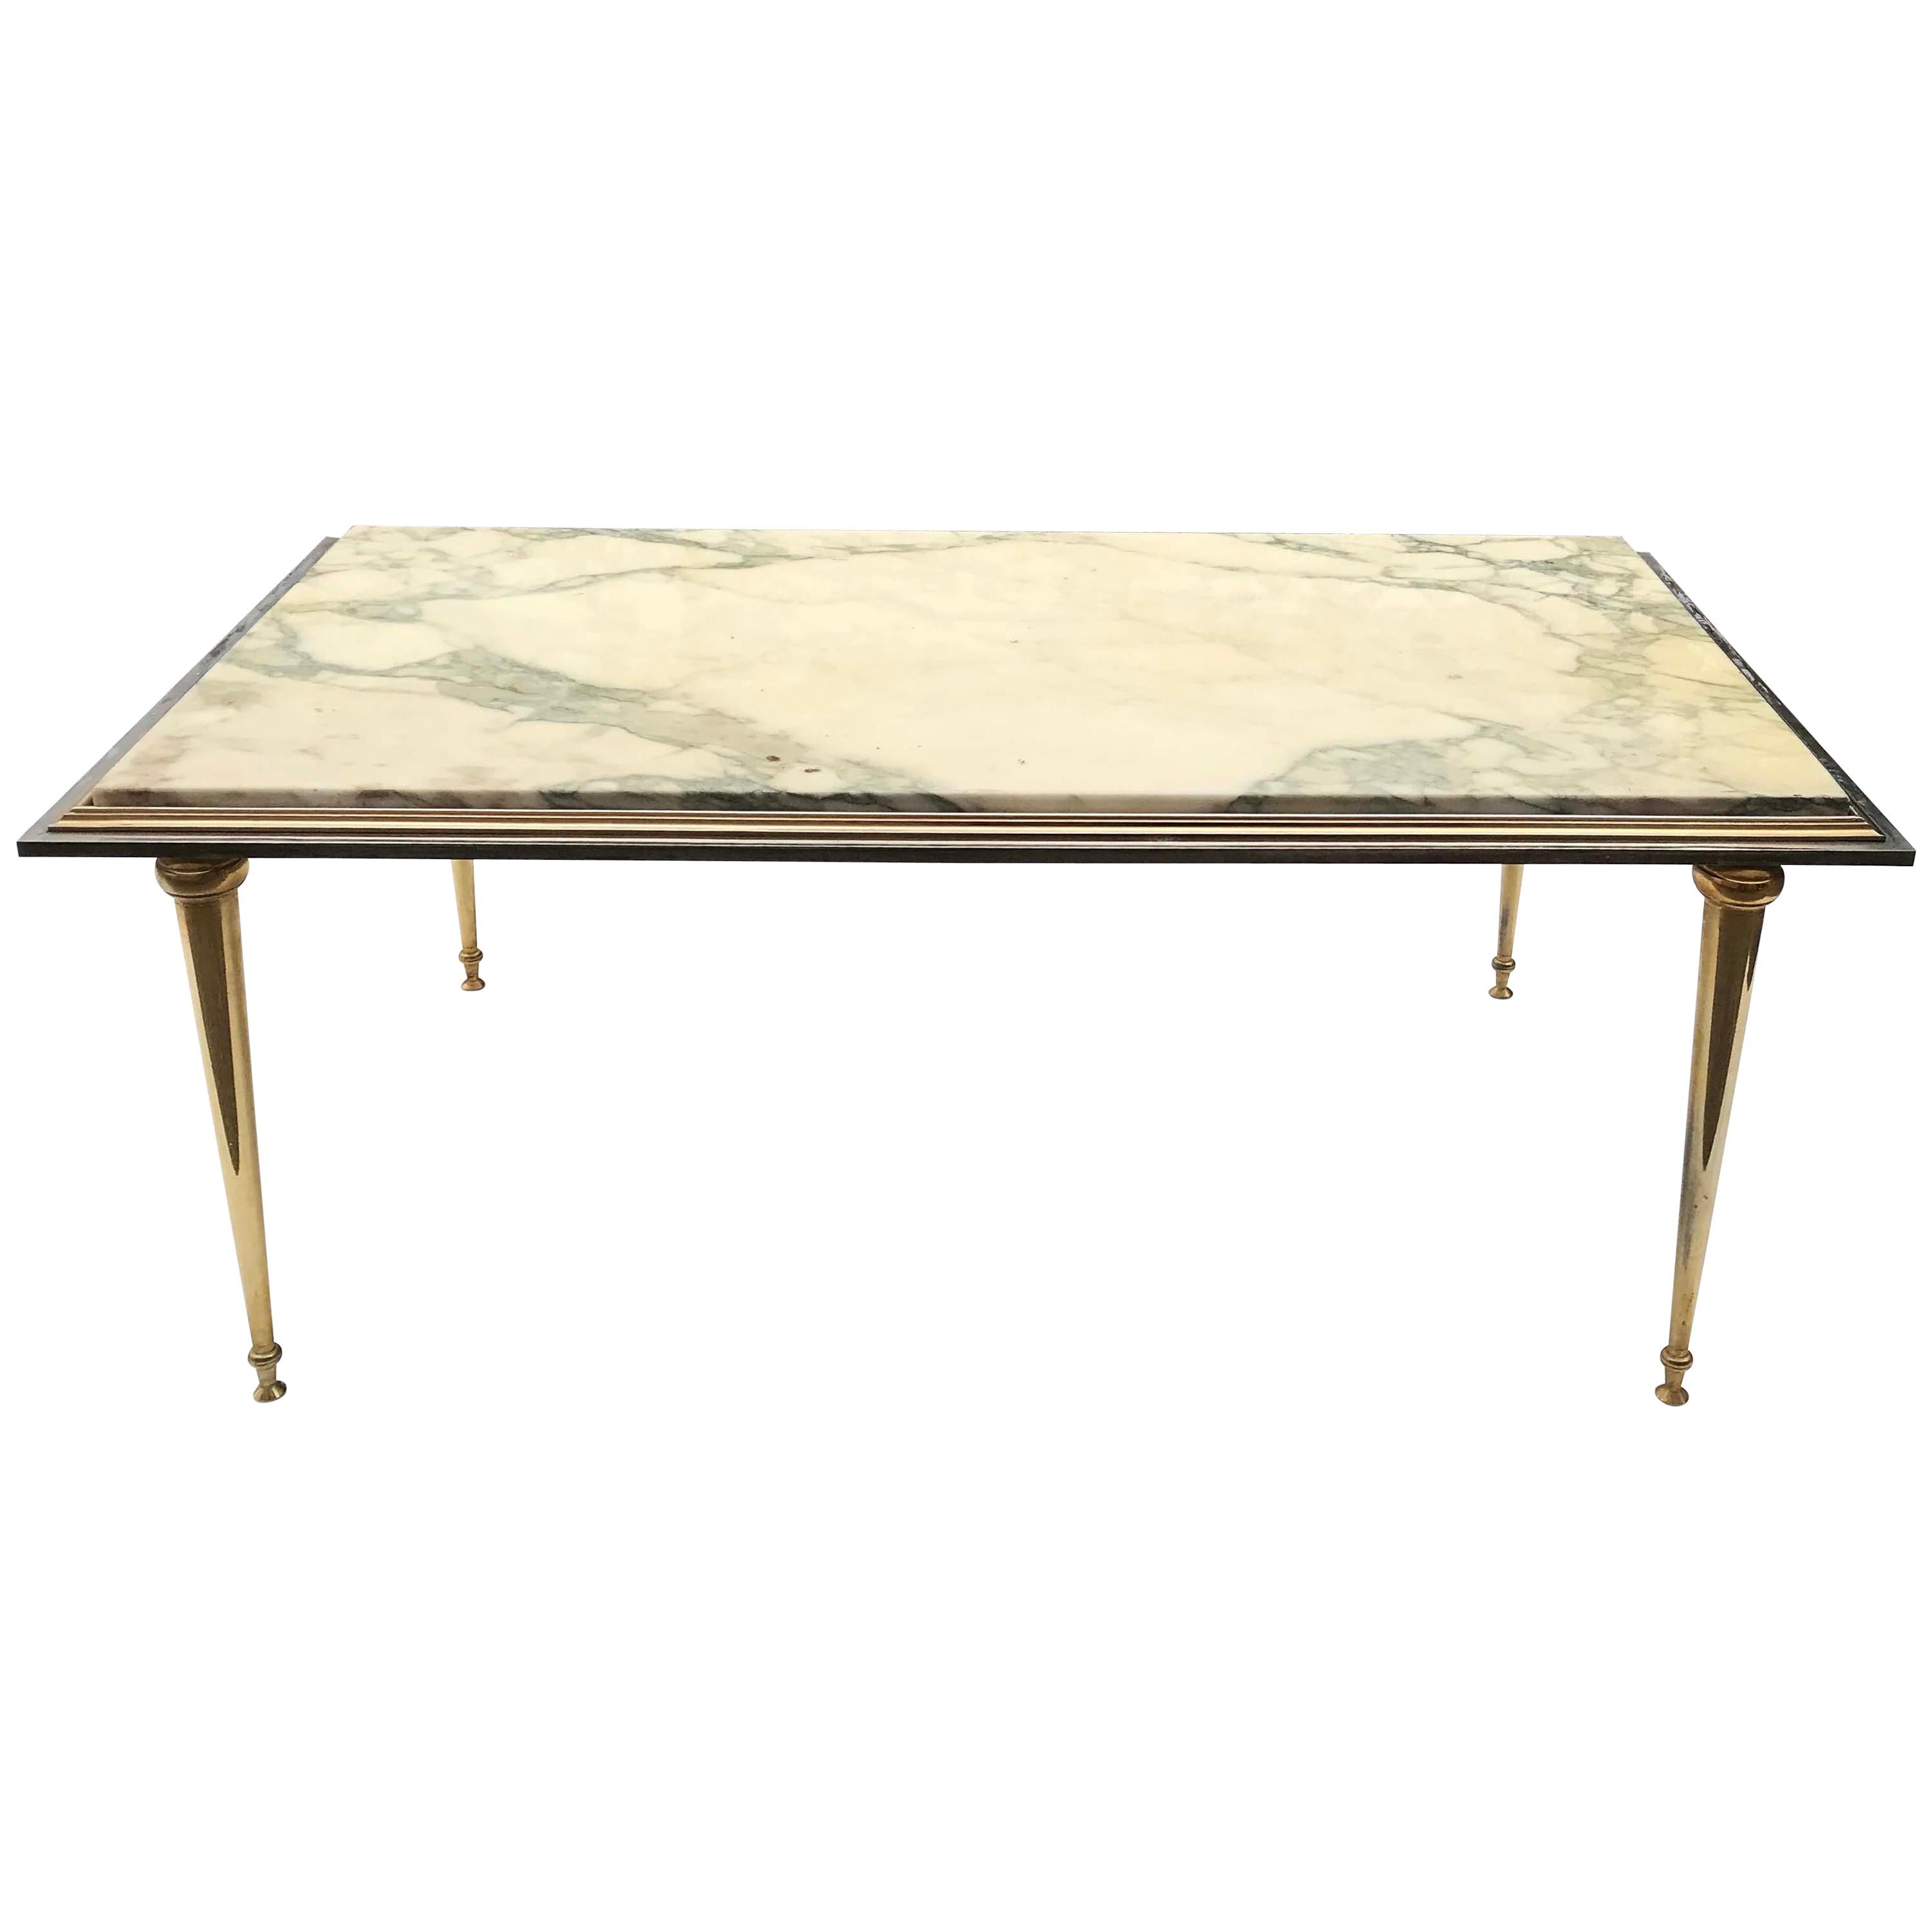 Maison Jansen Bronze and Marble Coffee Table